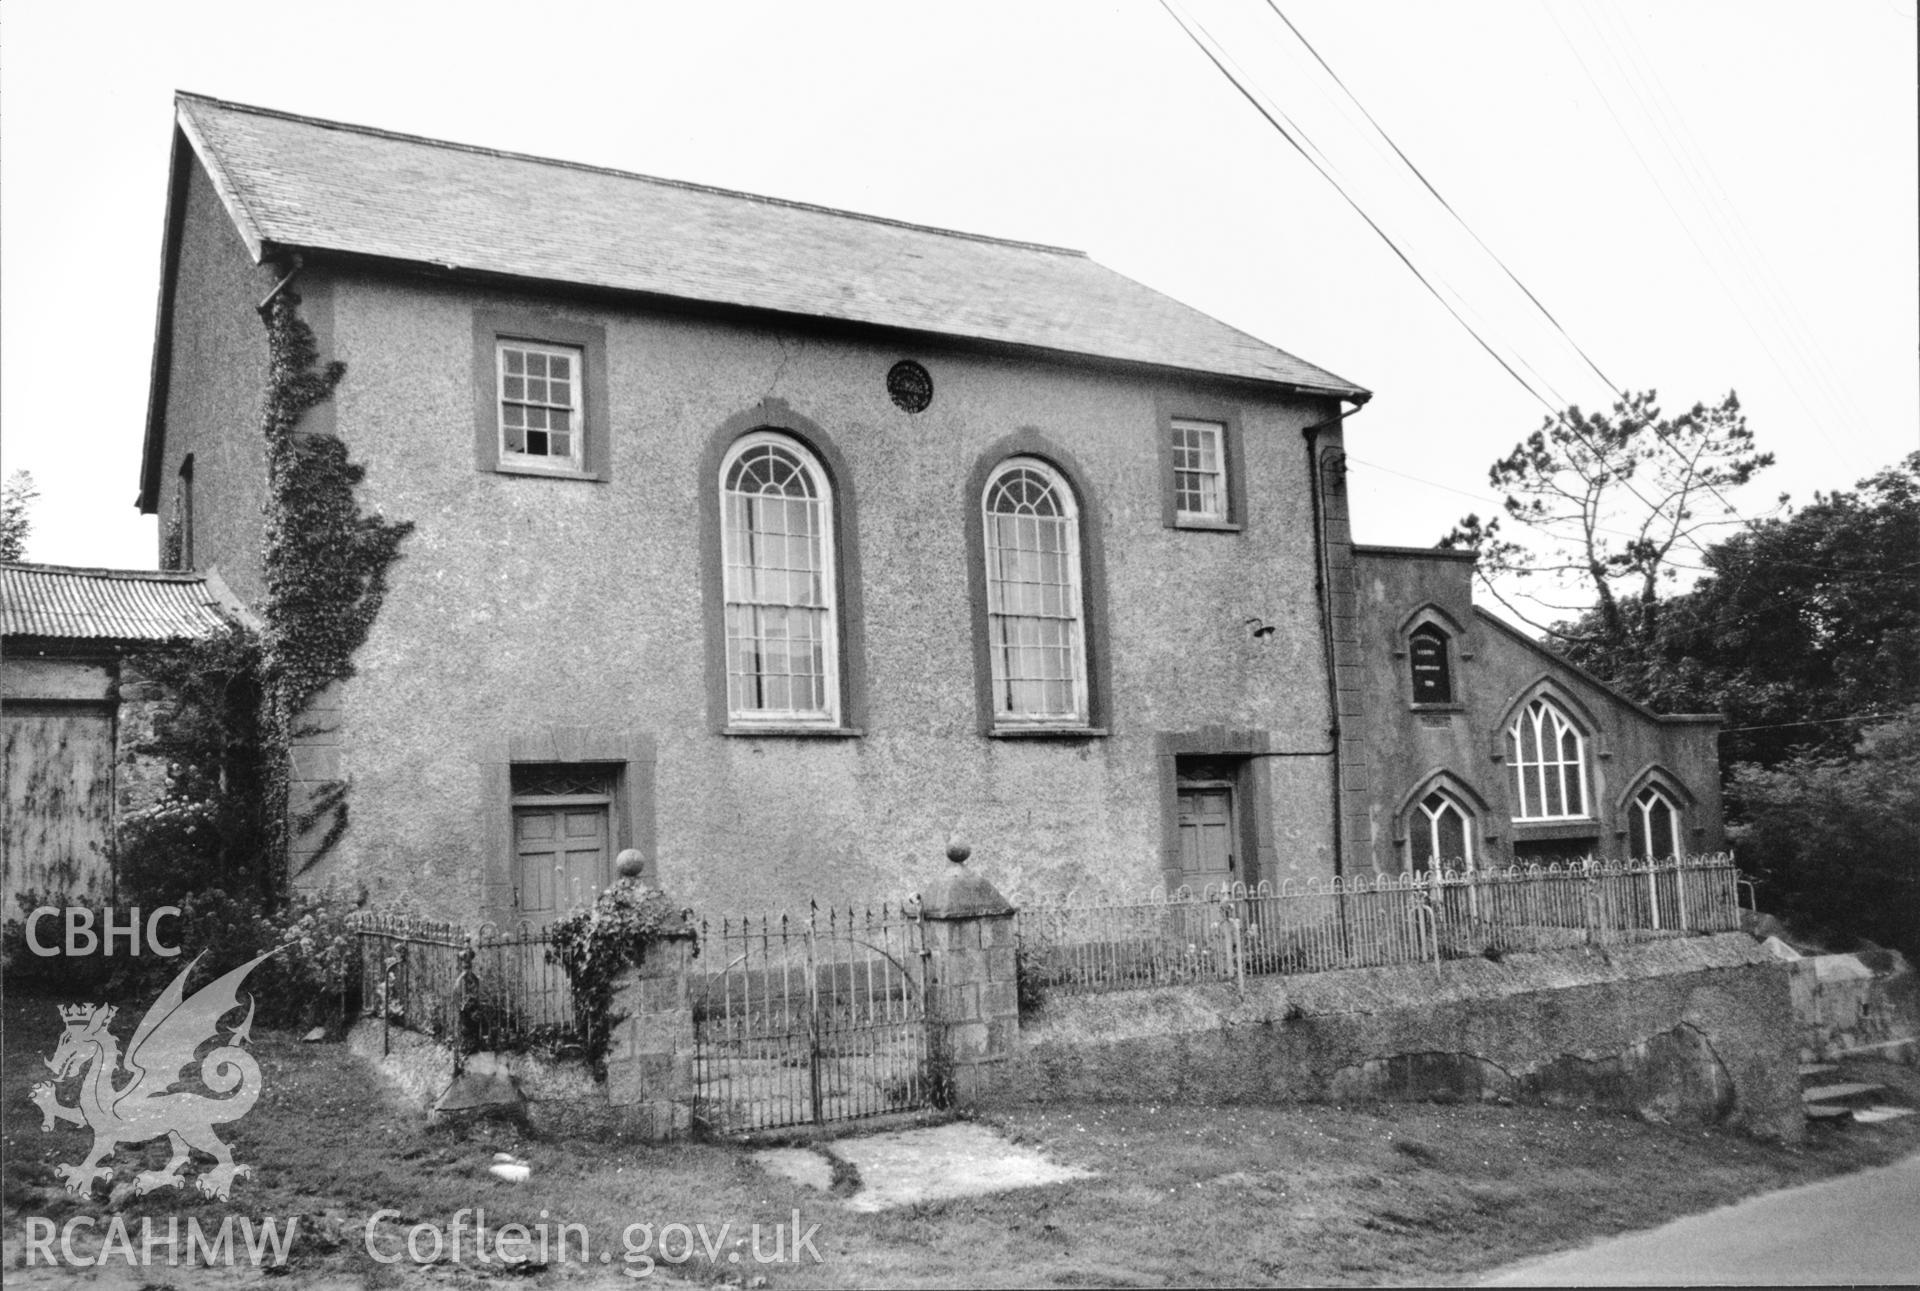 Digital copy of a black and white photograph showing an exterior view of Brynhenllan Welsh Calvinistic Methodist Chapel,  taken by Robert Scourfield, c.1996.